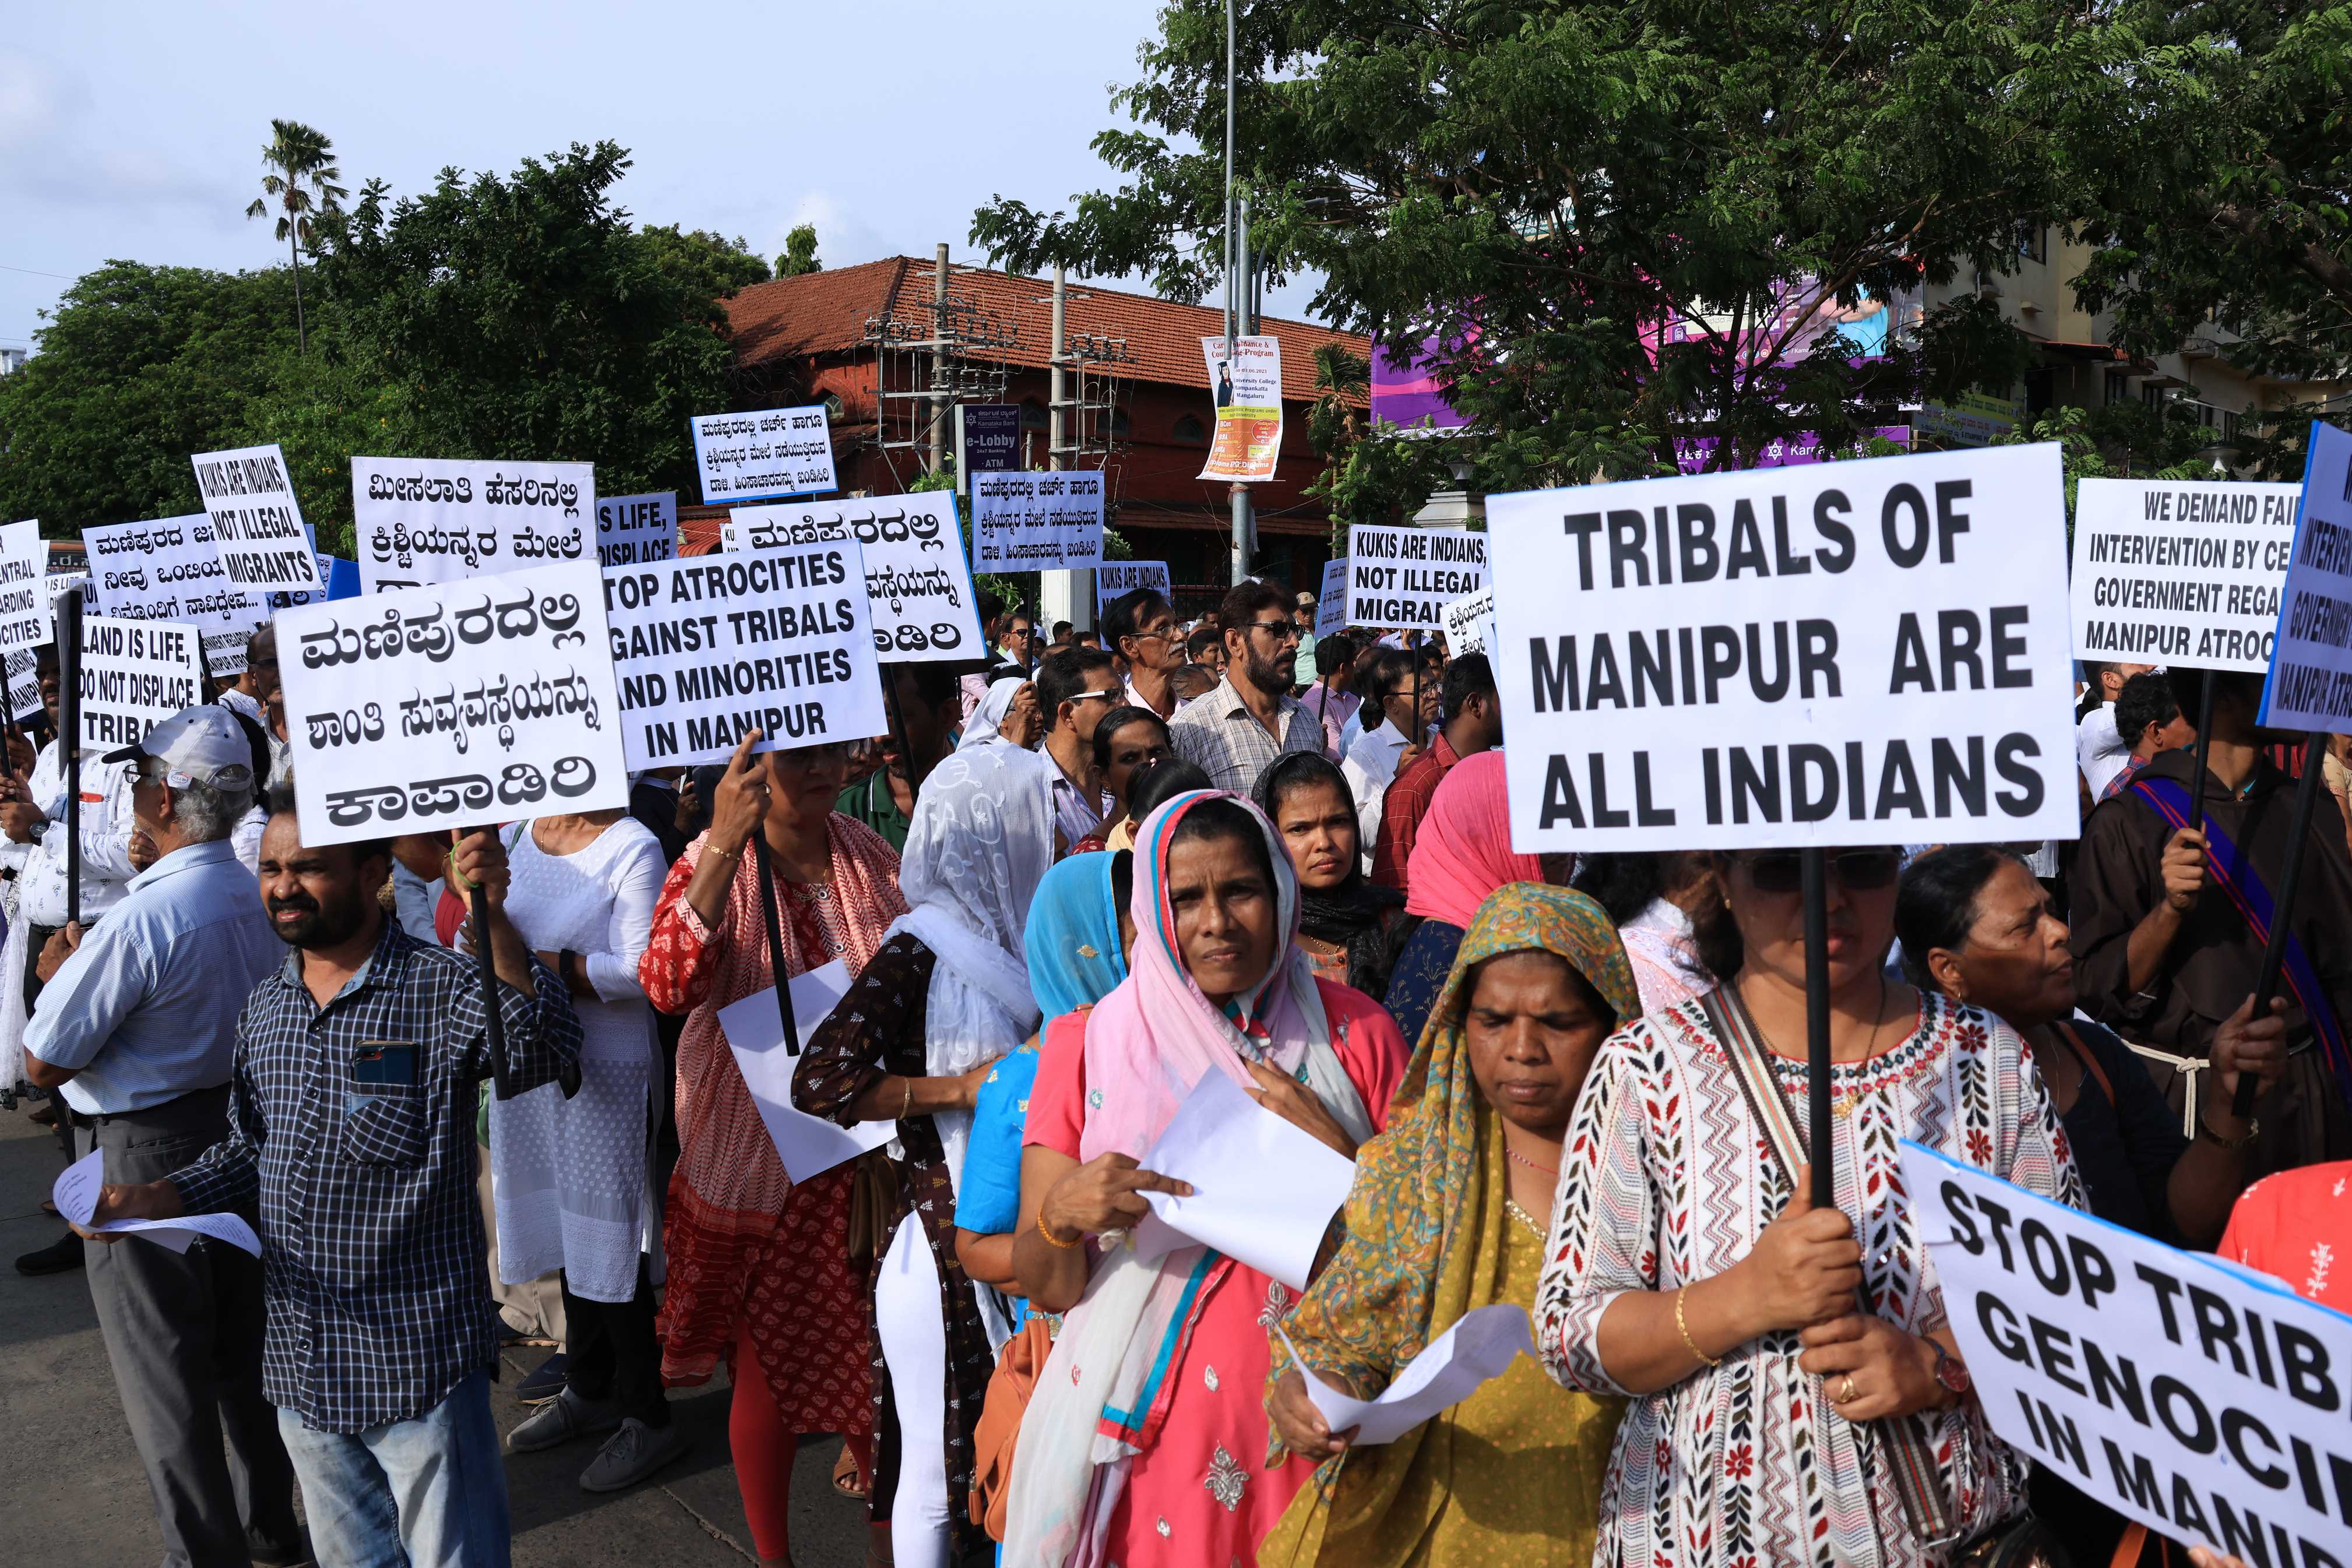 During the June 6 protest rally in Mangalore, India, protesters carry placards pledging solidarity with Christians in Manipur state. (Courtesy of Canera Communications/Fr. Anil Ivan Fernandes)